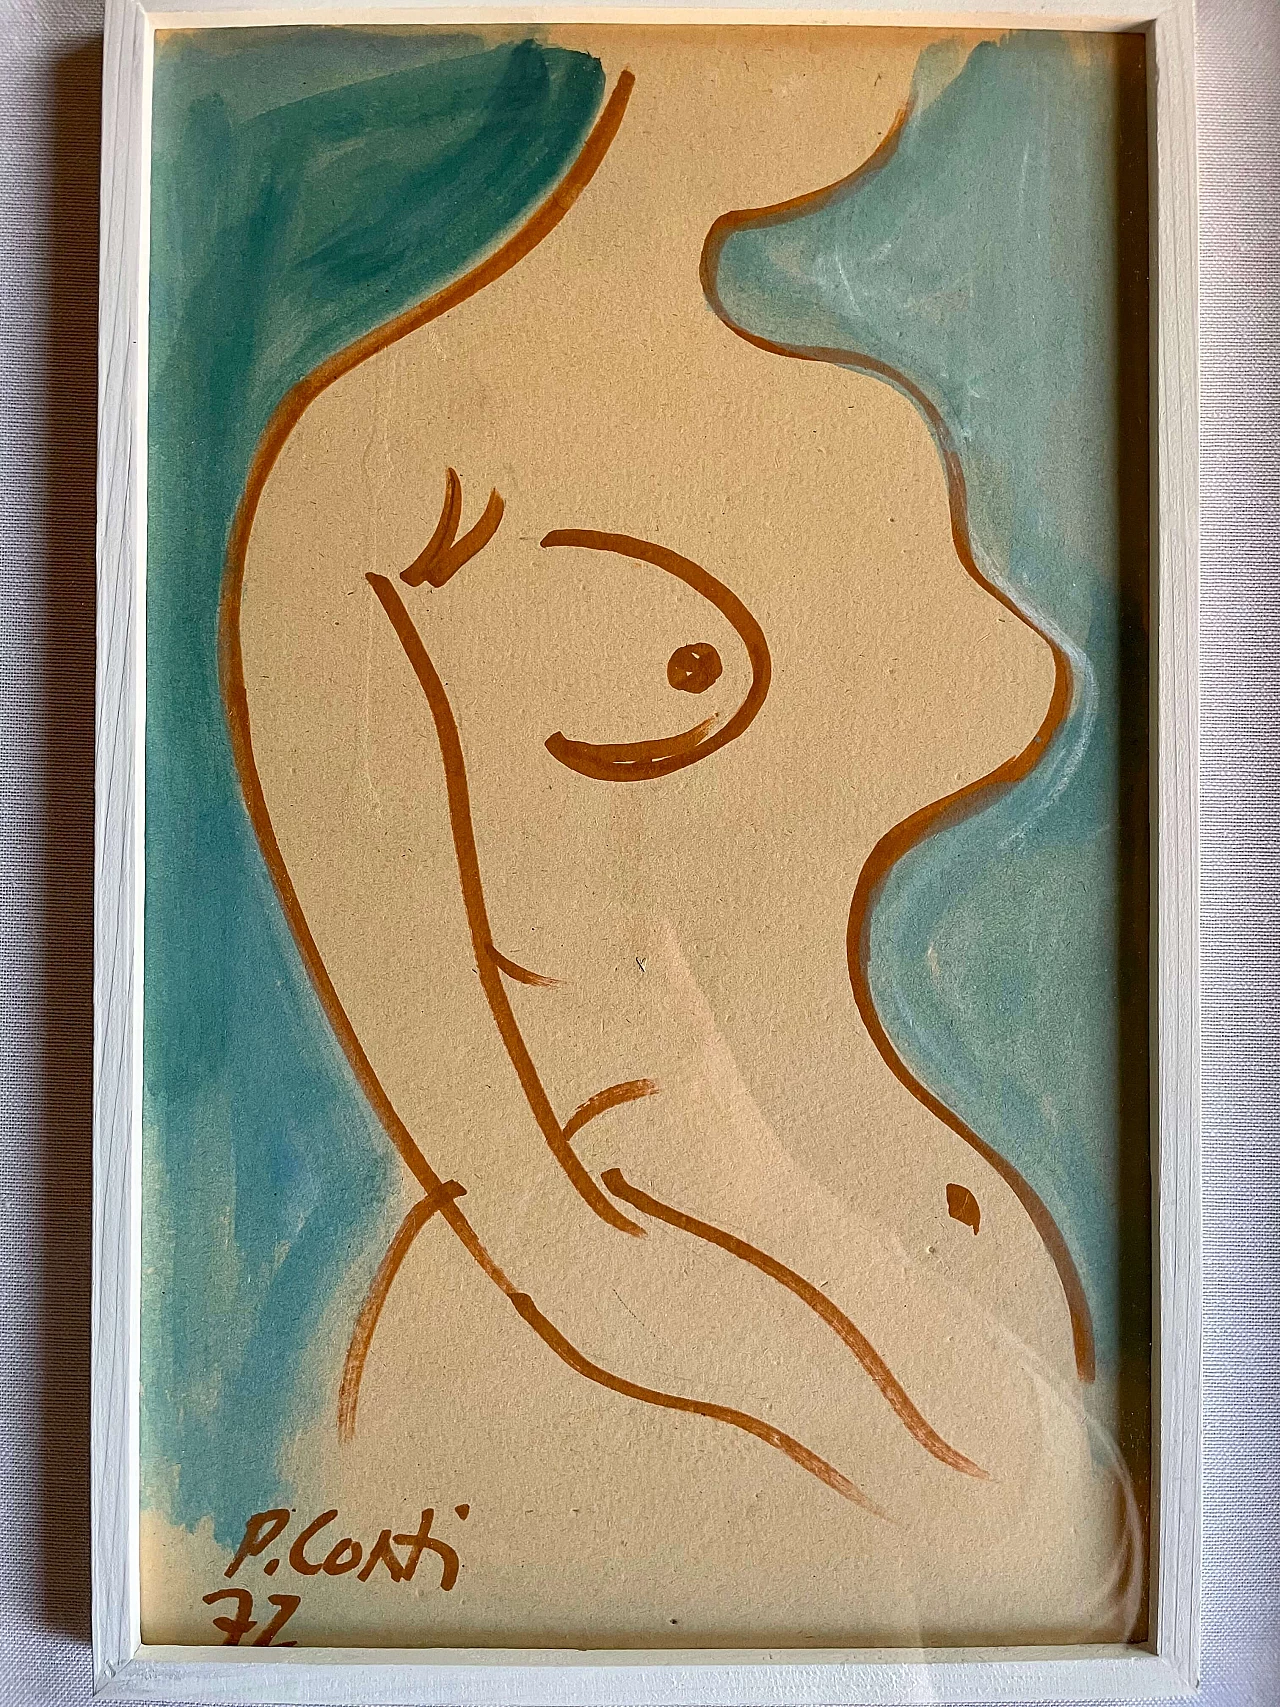 Watercolor on cardboard of female nude by Primo Conti, 1972 1383950